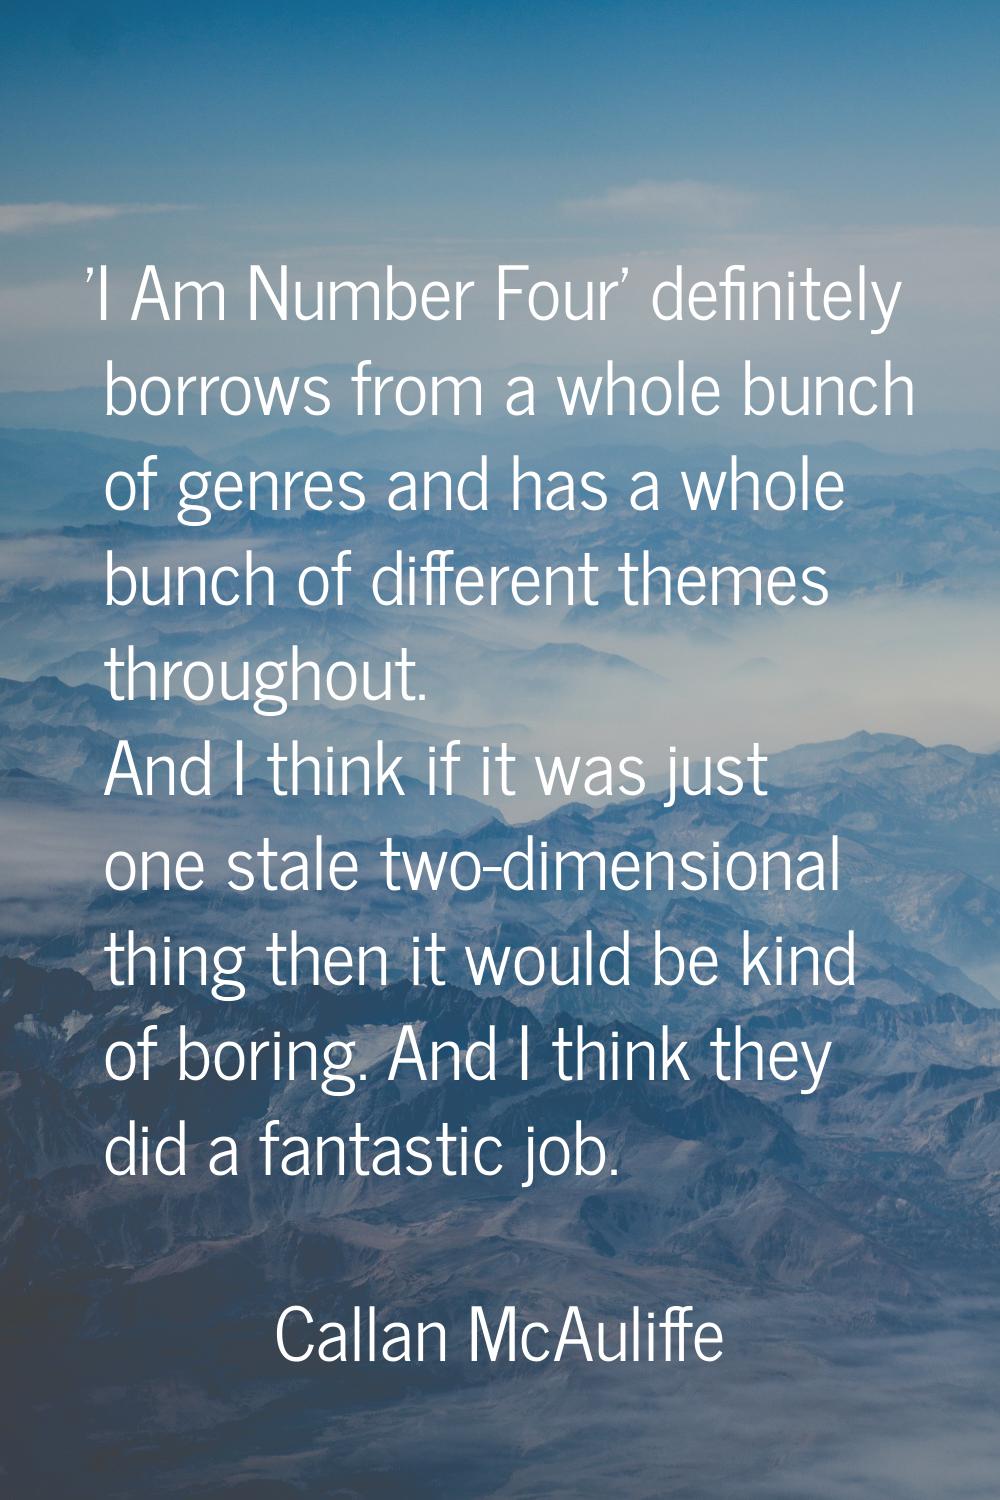 'I Am Number Four' definitely borrows from a whole bunch of genres and has a whole bunch of differe